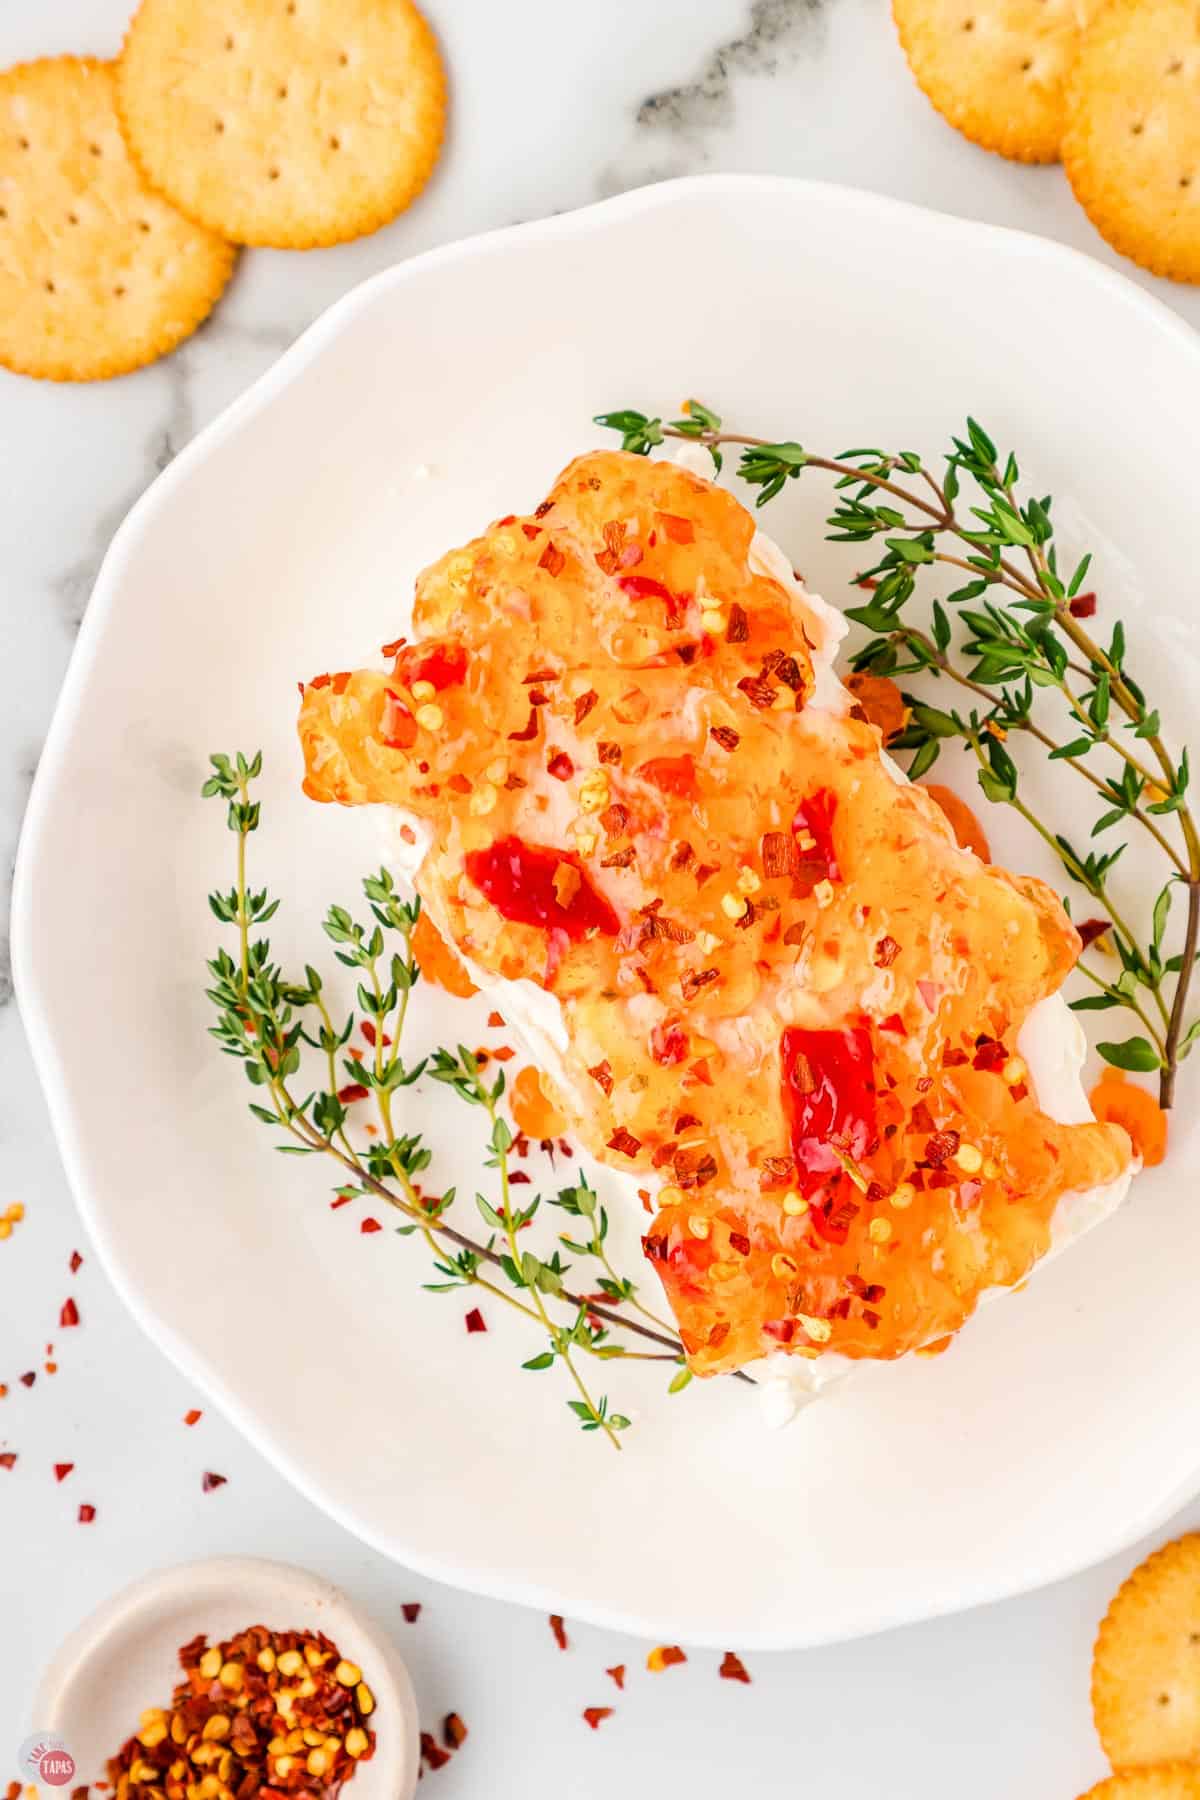 red pepper jelly cream cheese dip